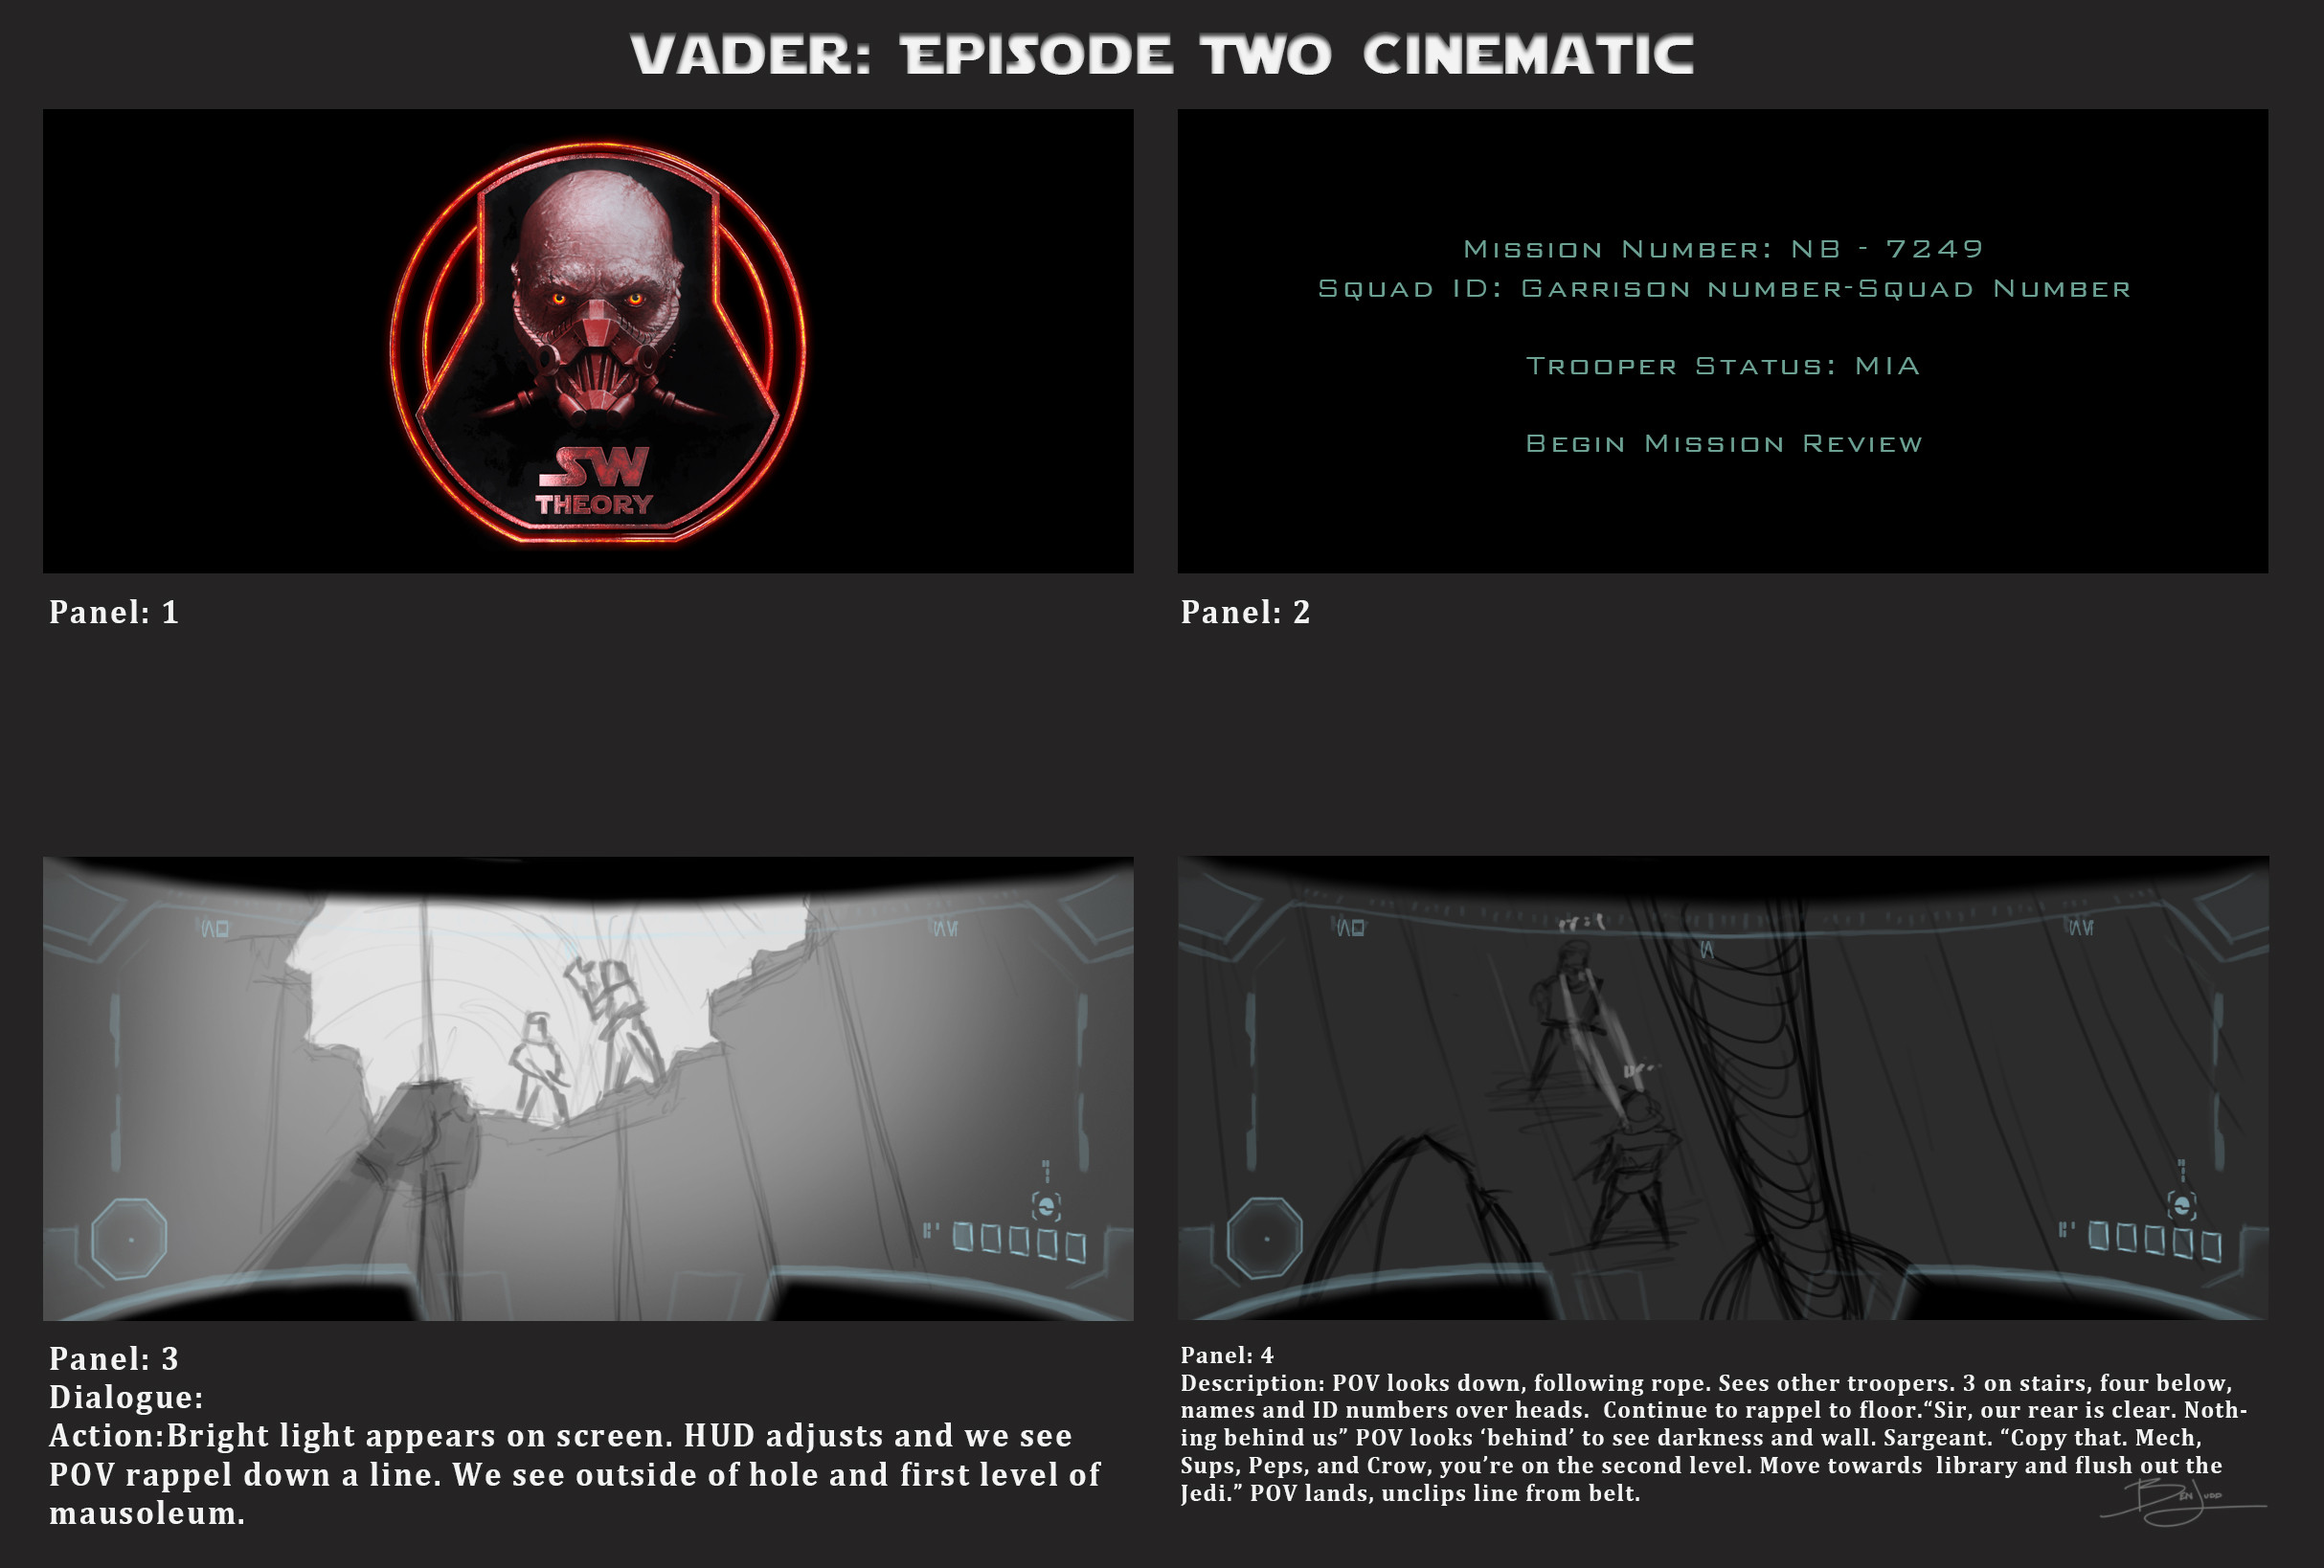 Eventually, Theory wanted to make a full cinematic, and show what happened well before Vader arrived on Naboo. So I wrote a new, one-shot P.O.V. cinematic, with input from Theory and Jack Millard.